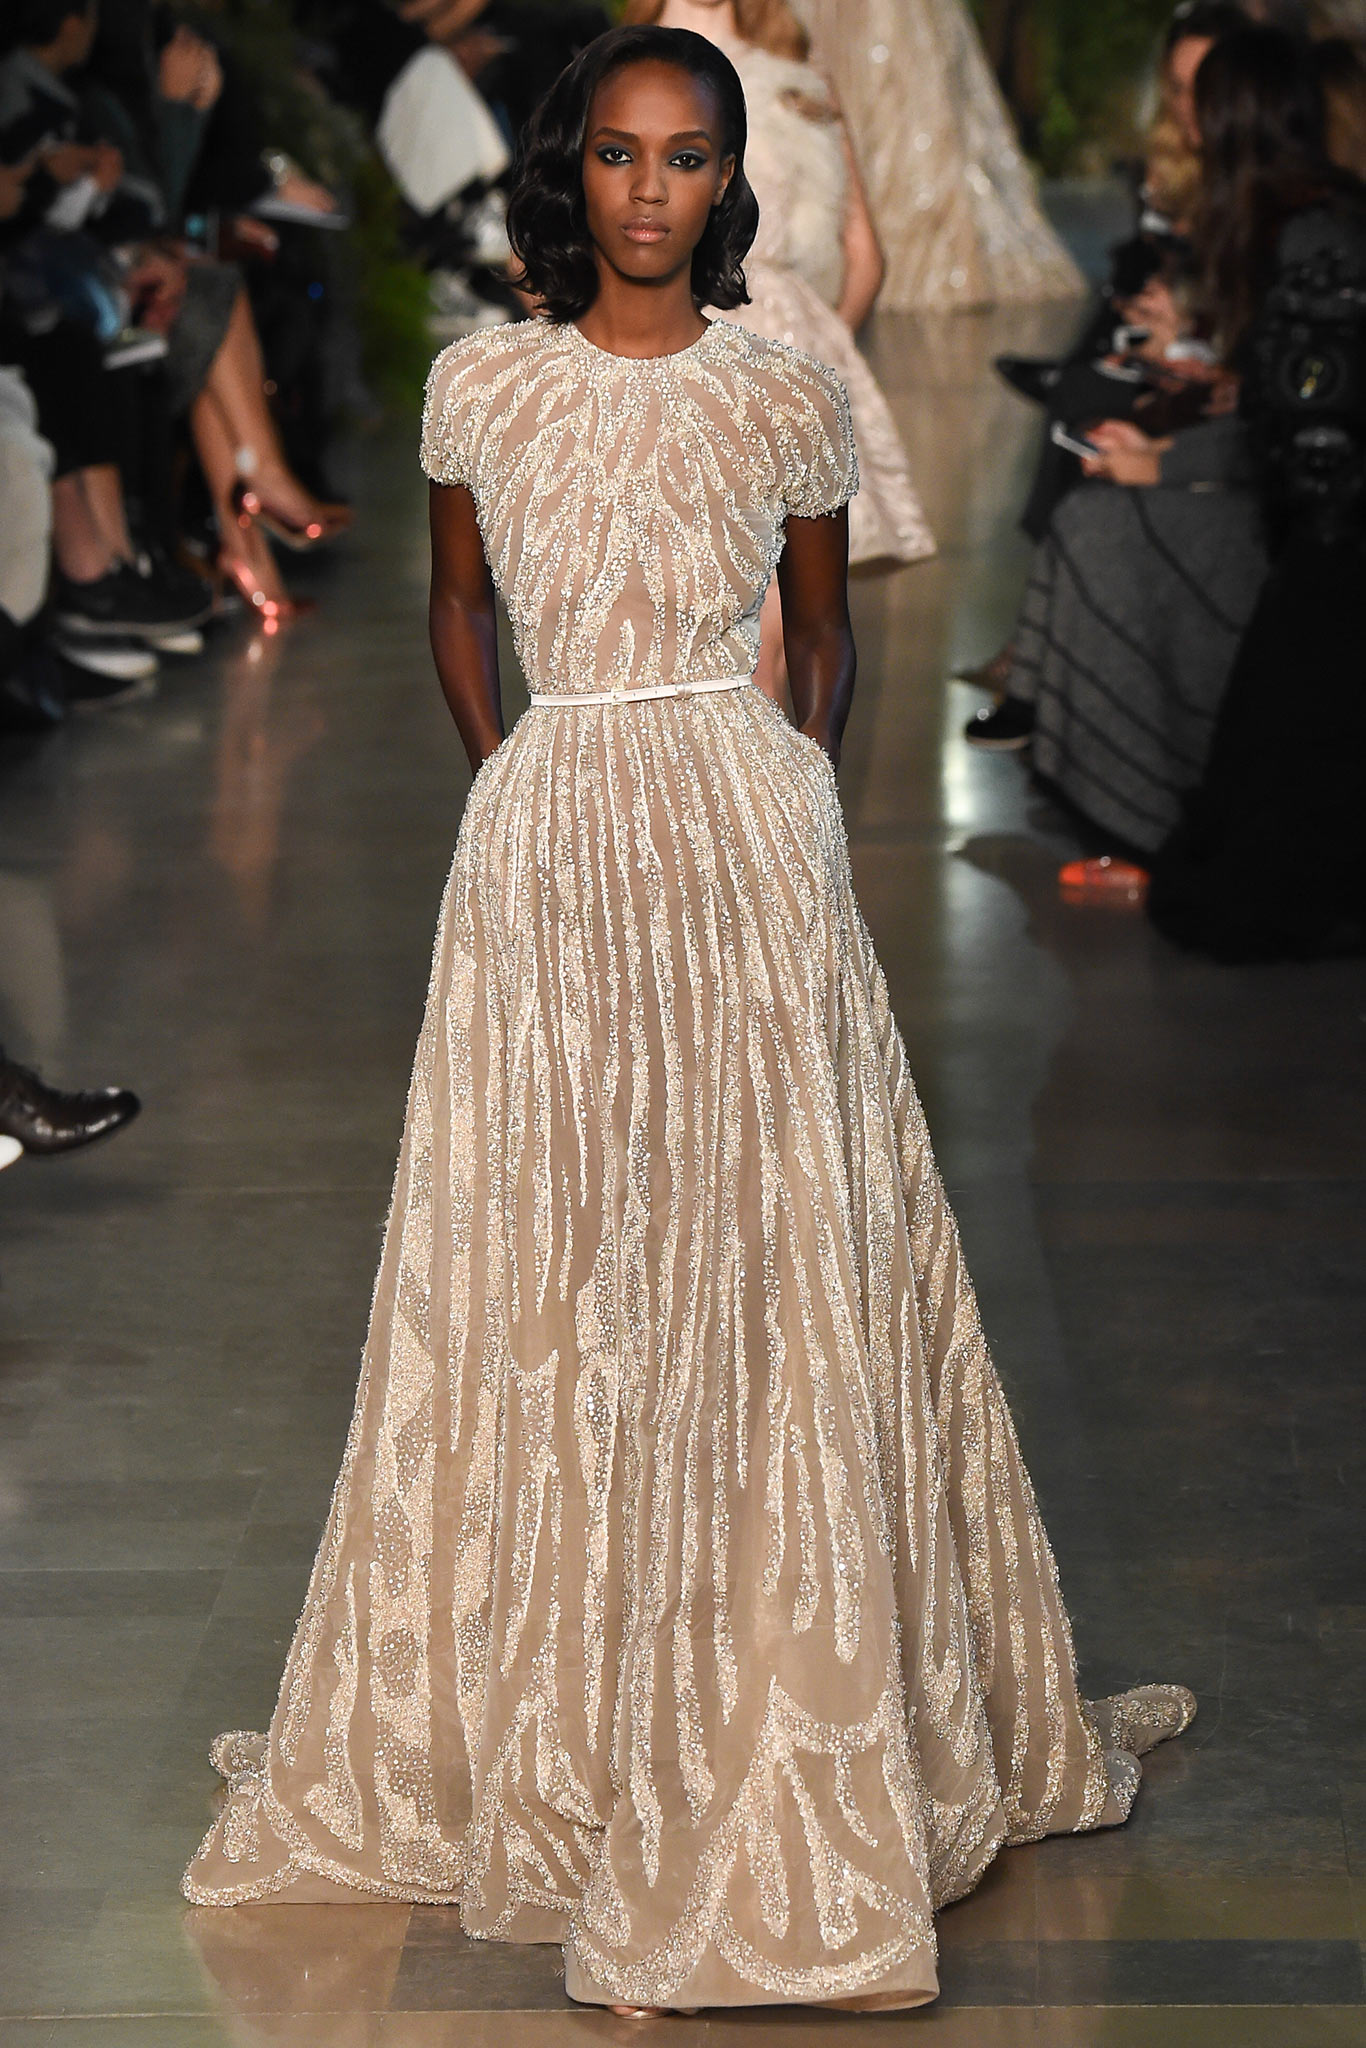 PHOTOS: Elie Saab Spring 2015 Couture Collection